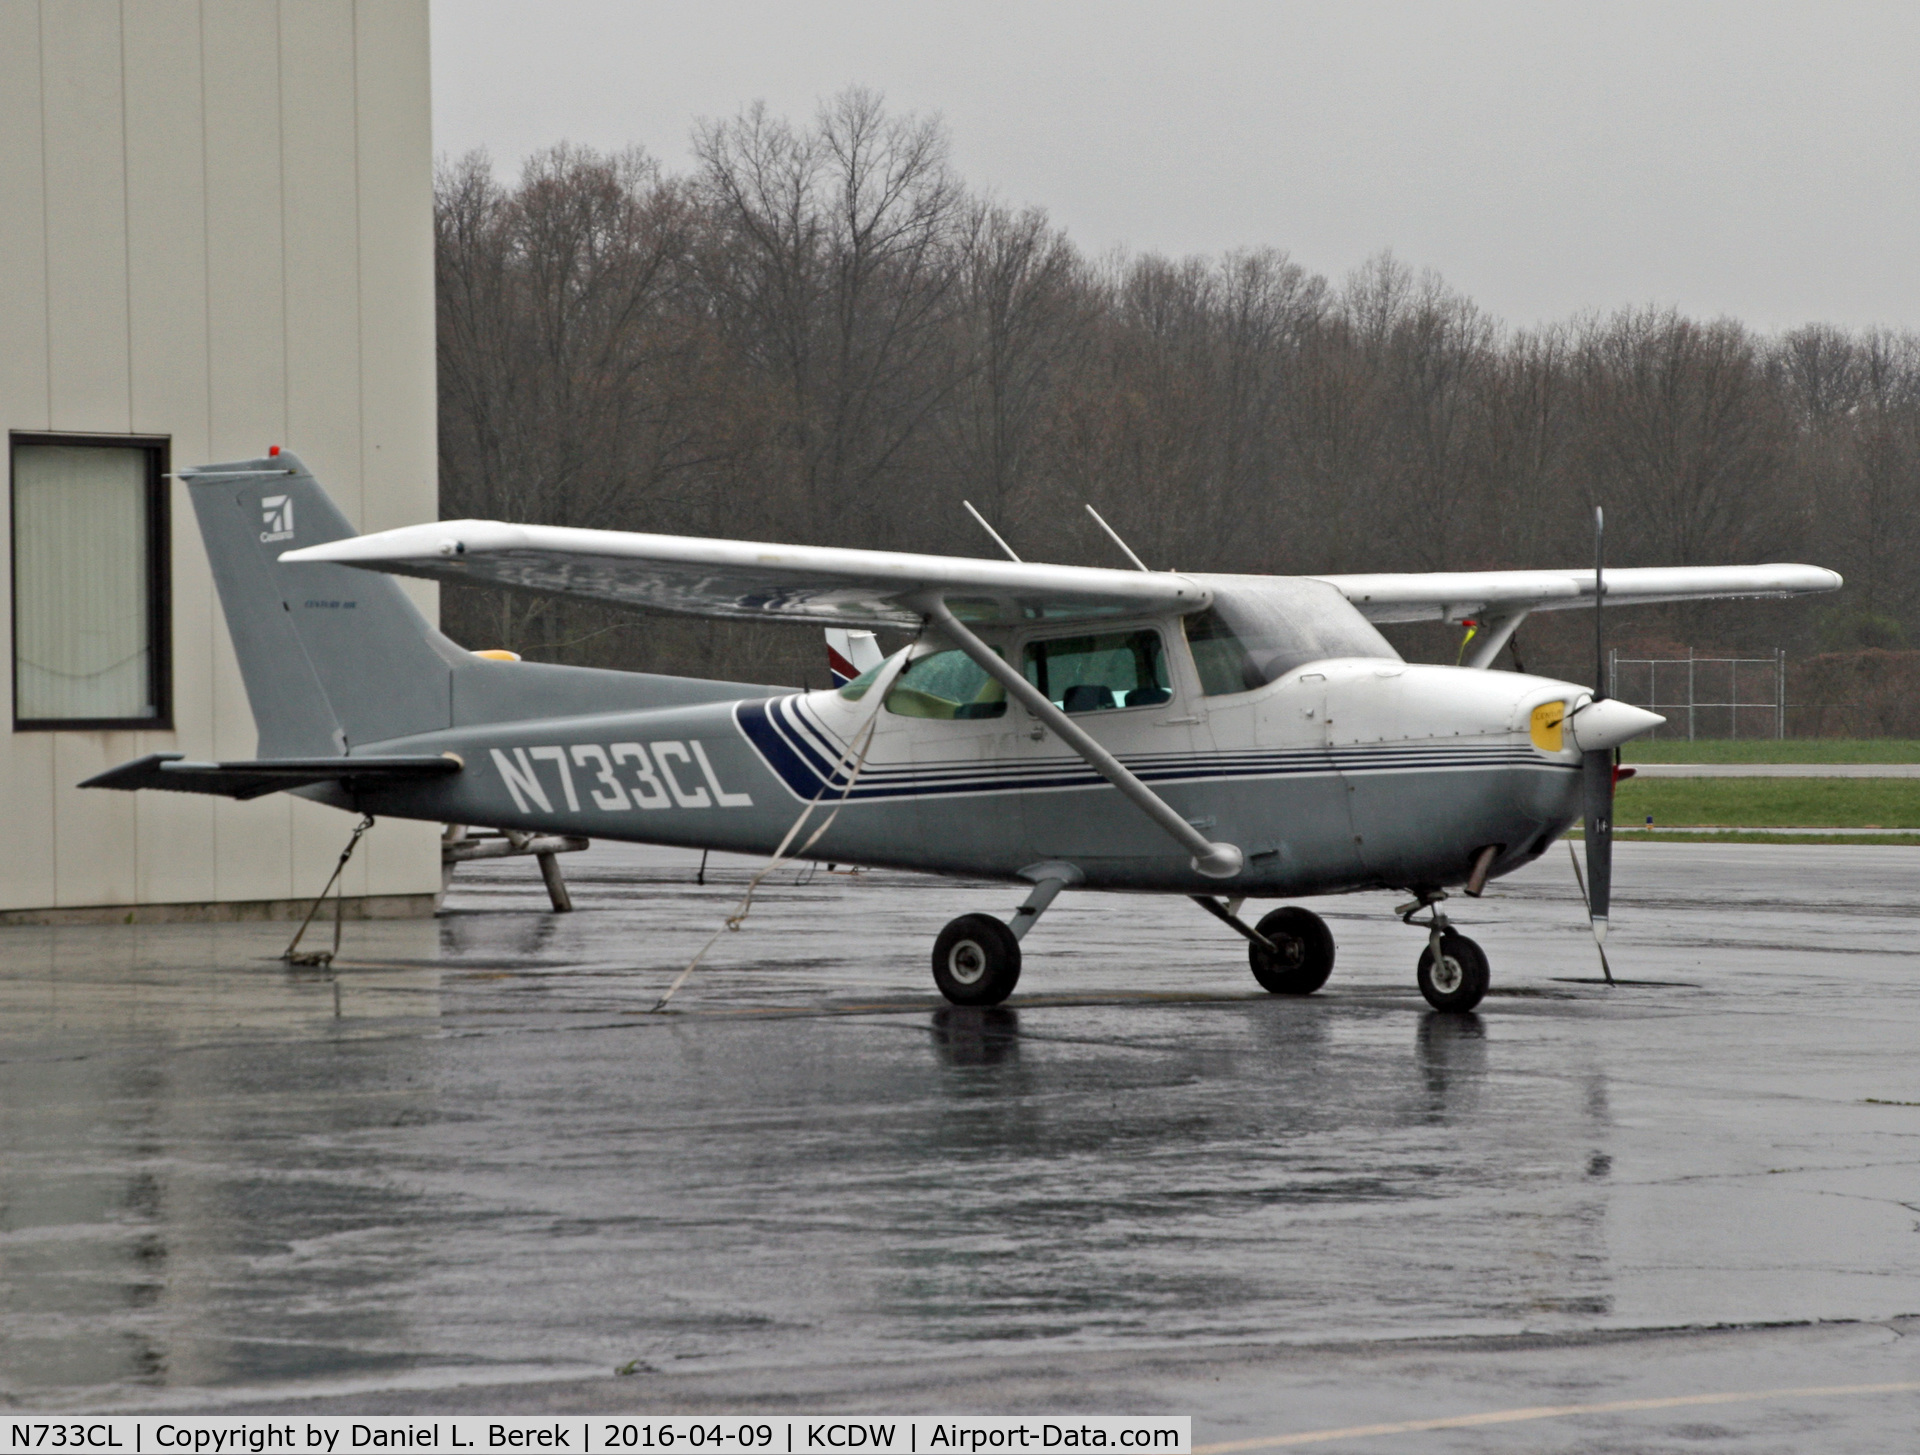 N733CL, 1976 Cessna 172N C/N 17268190, Gray aircraft on a gray day - I last spotted this nice plane eight years ago, in 2006.